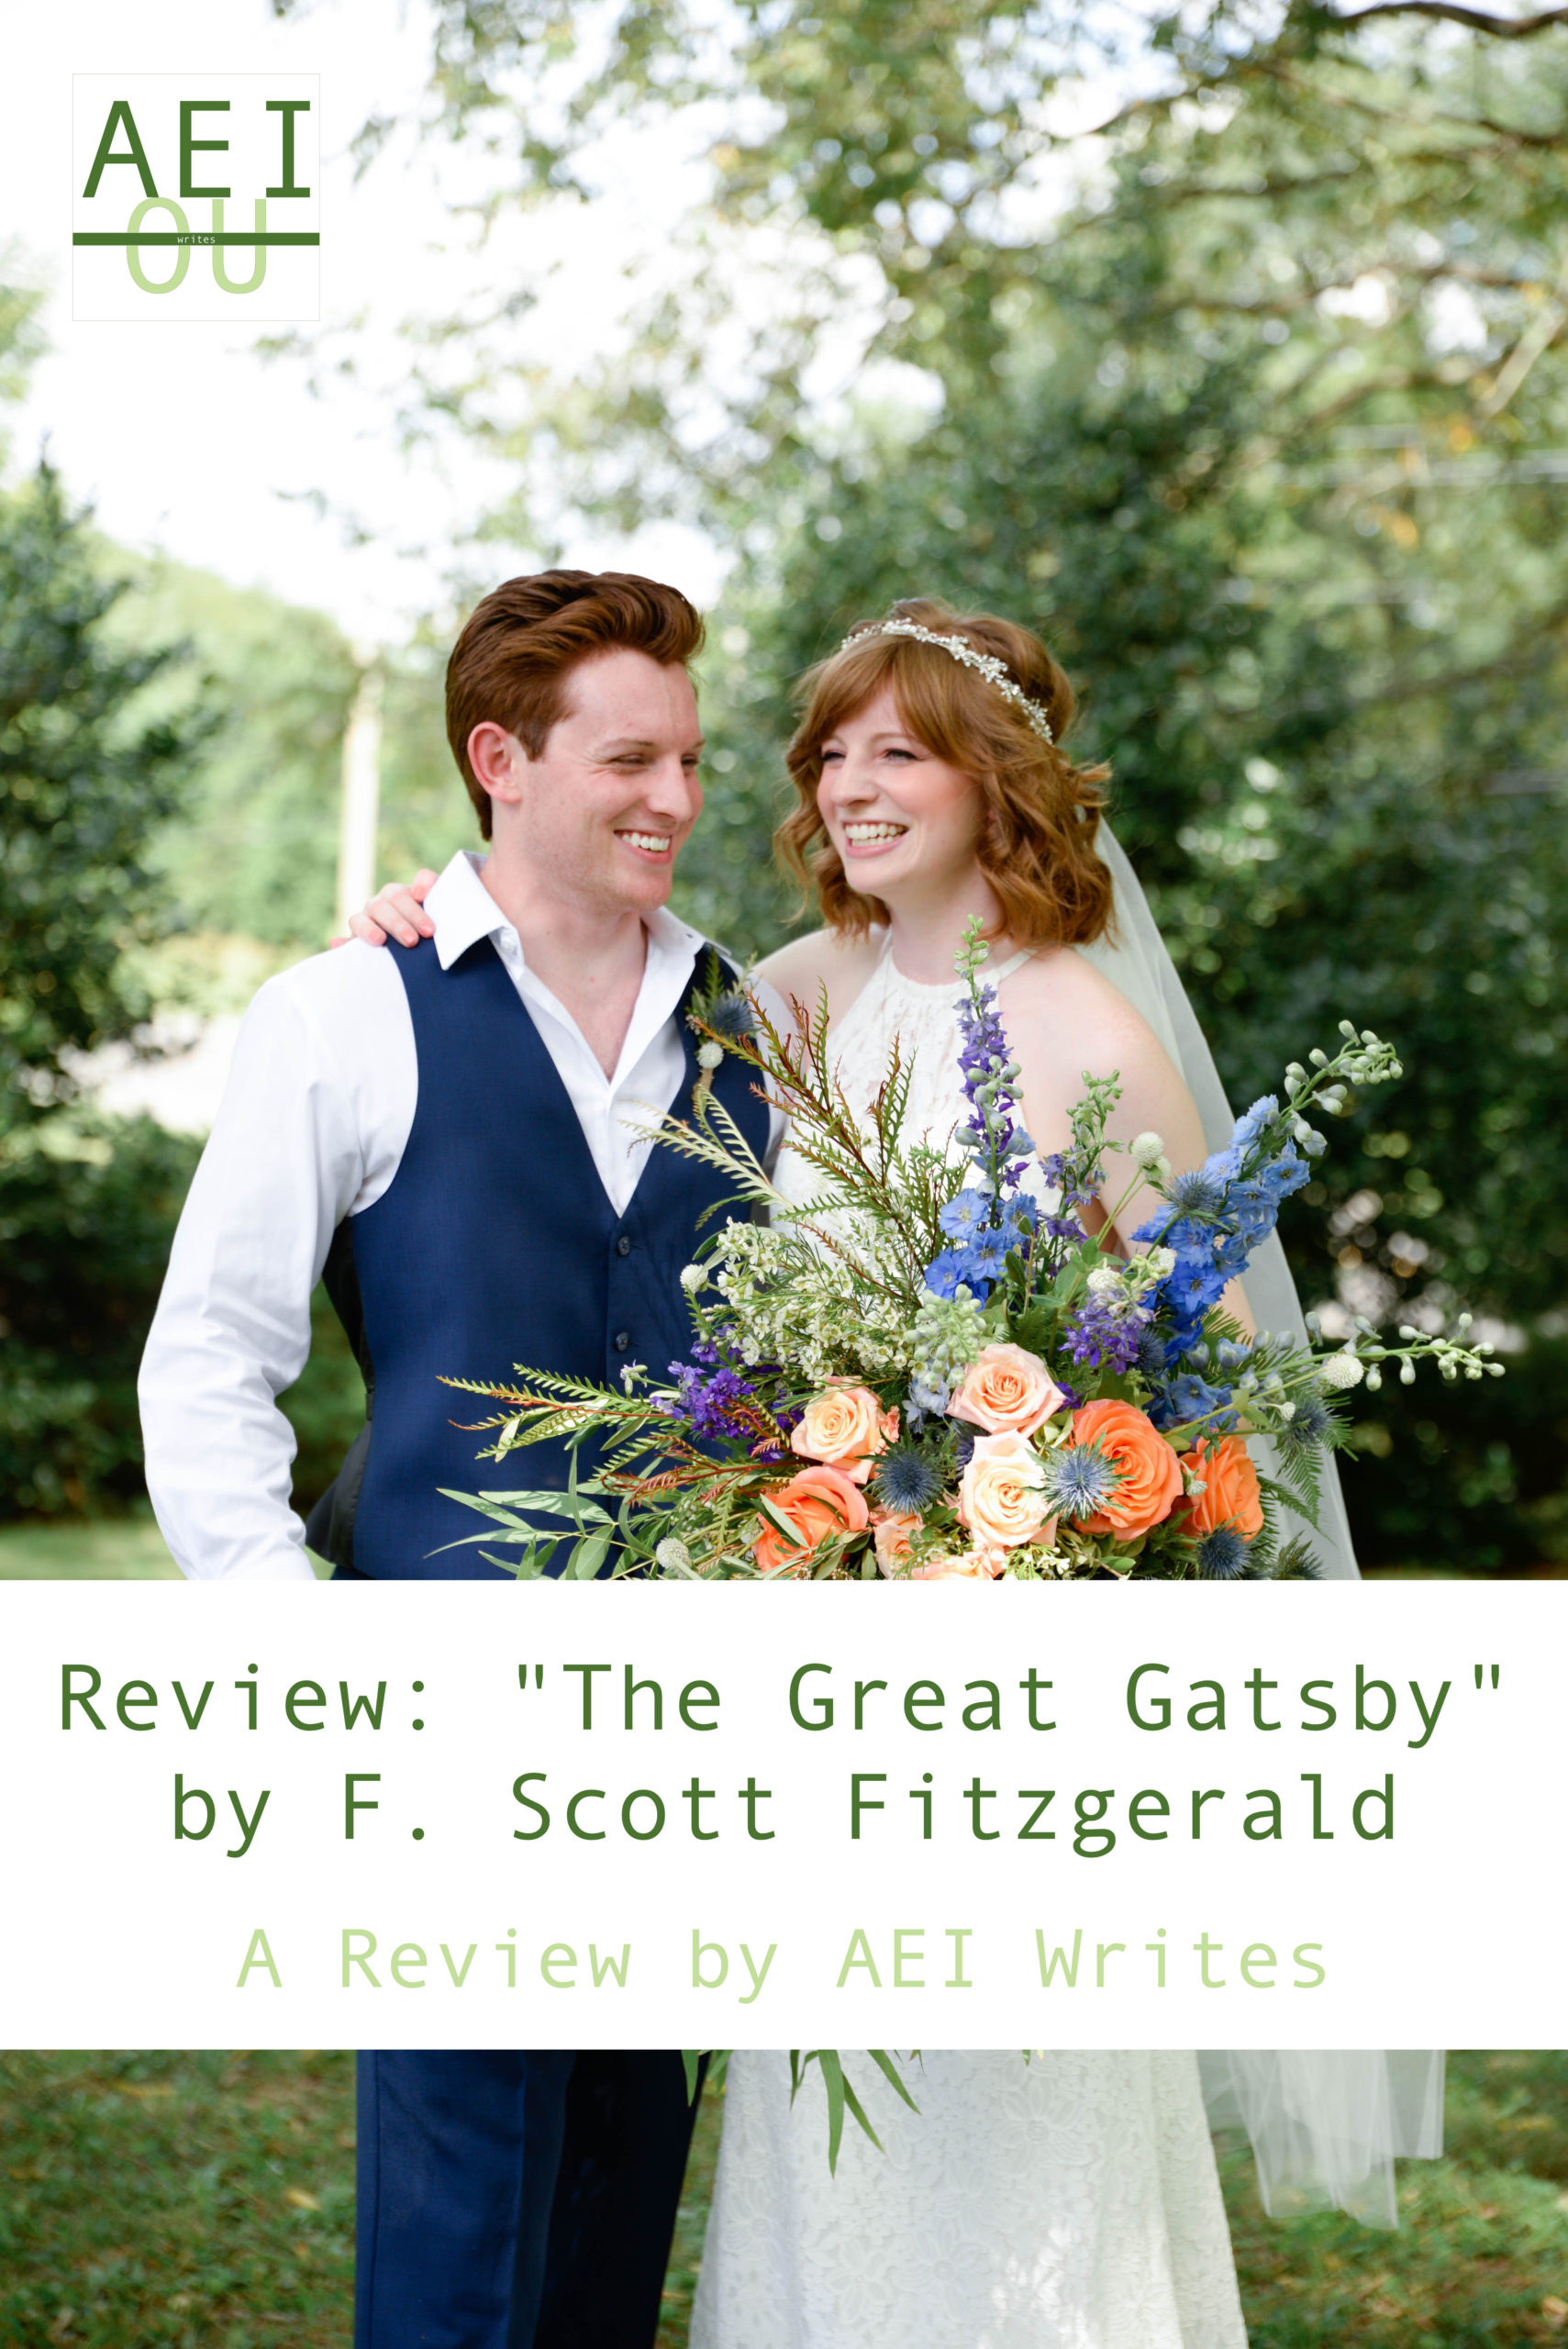 Review: “The Great Gatsby” by F. Scott Fitzgerald